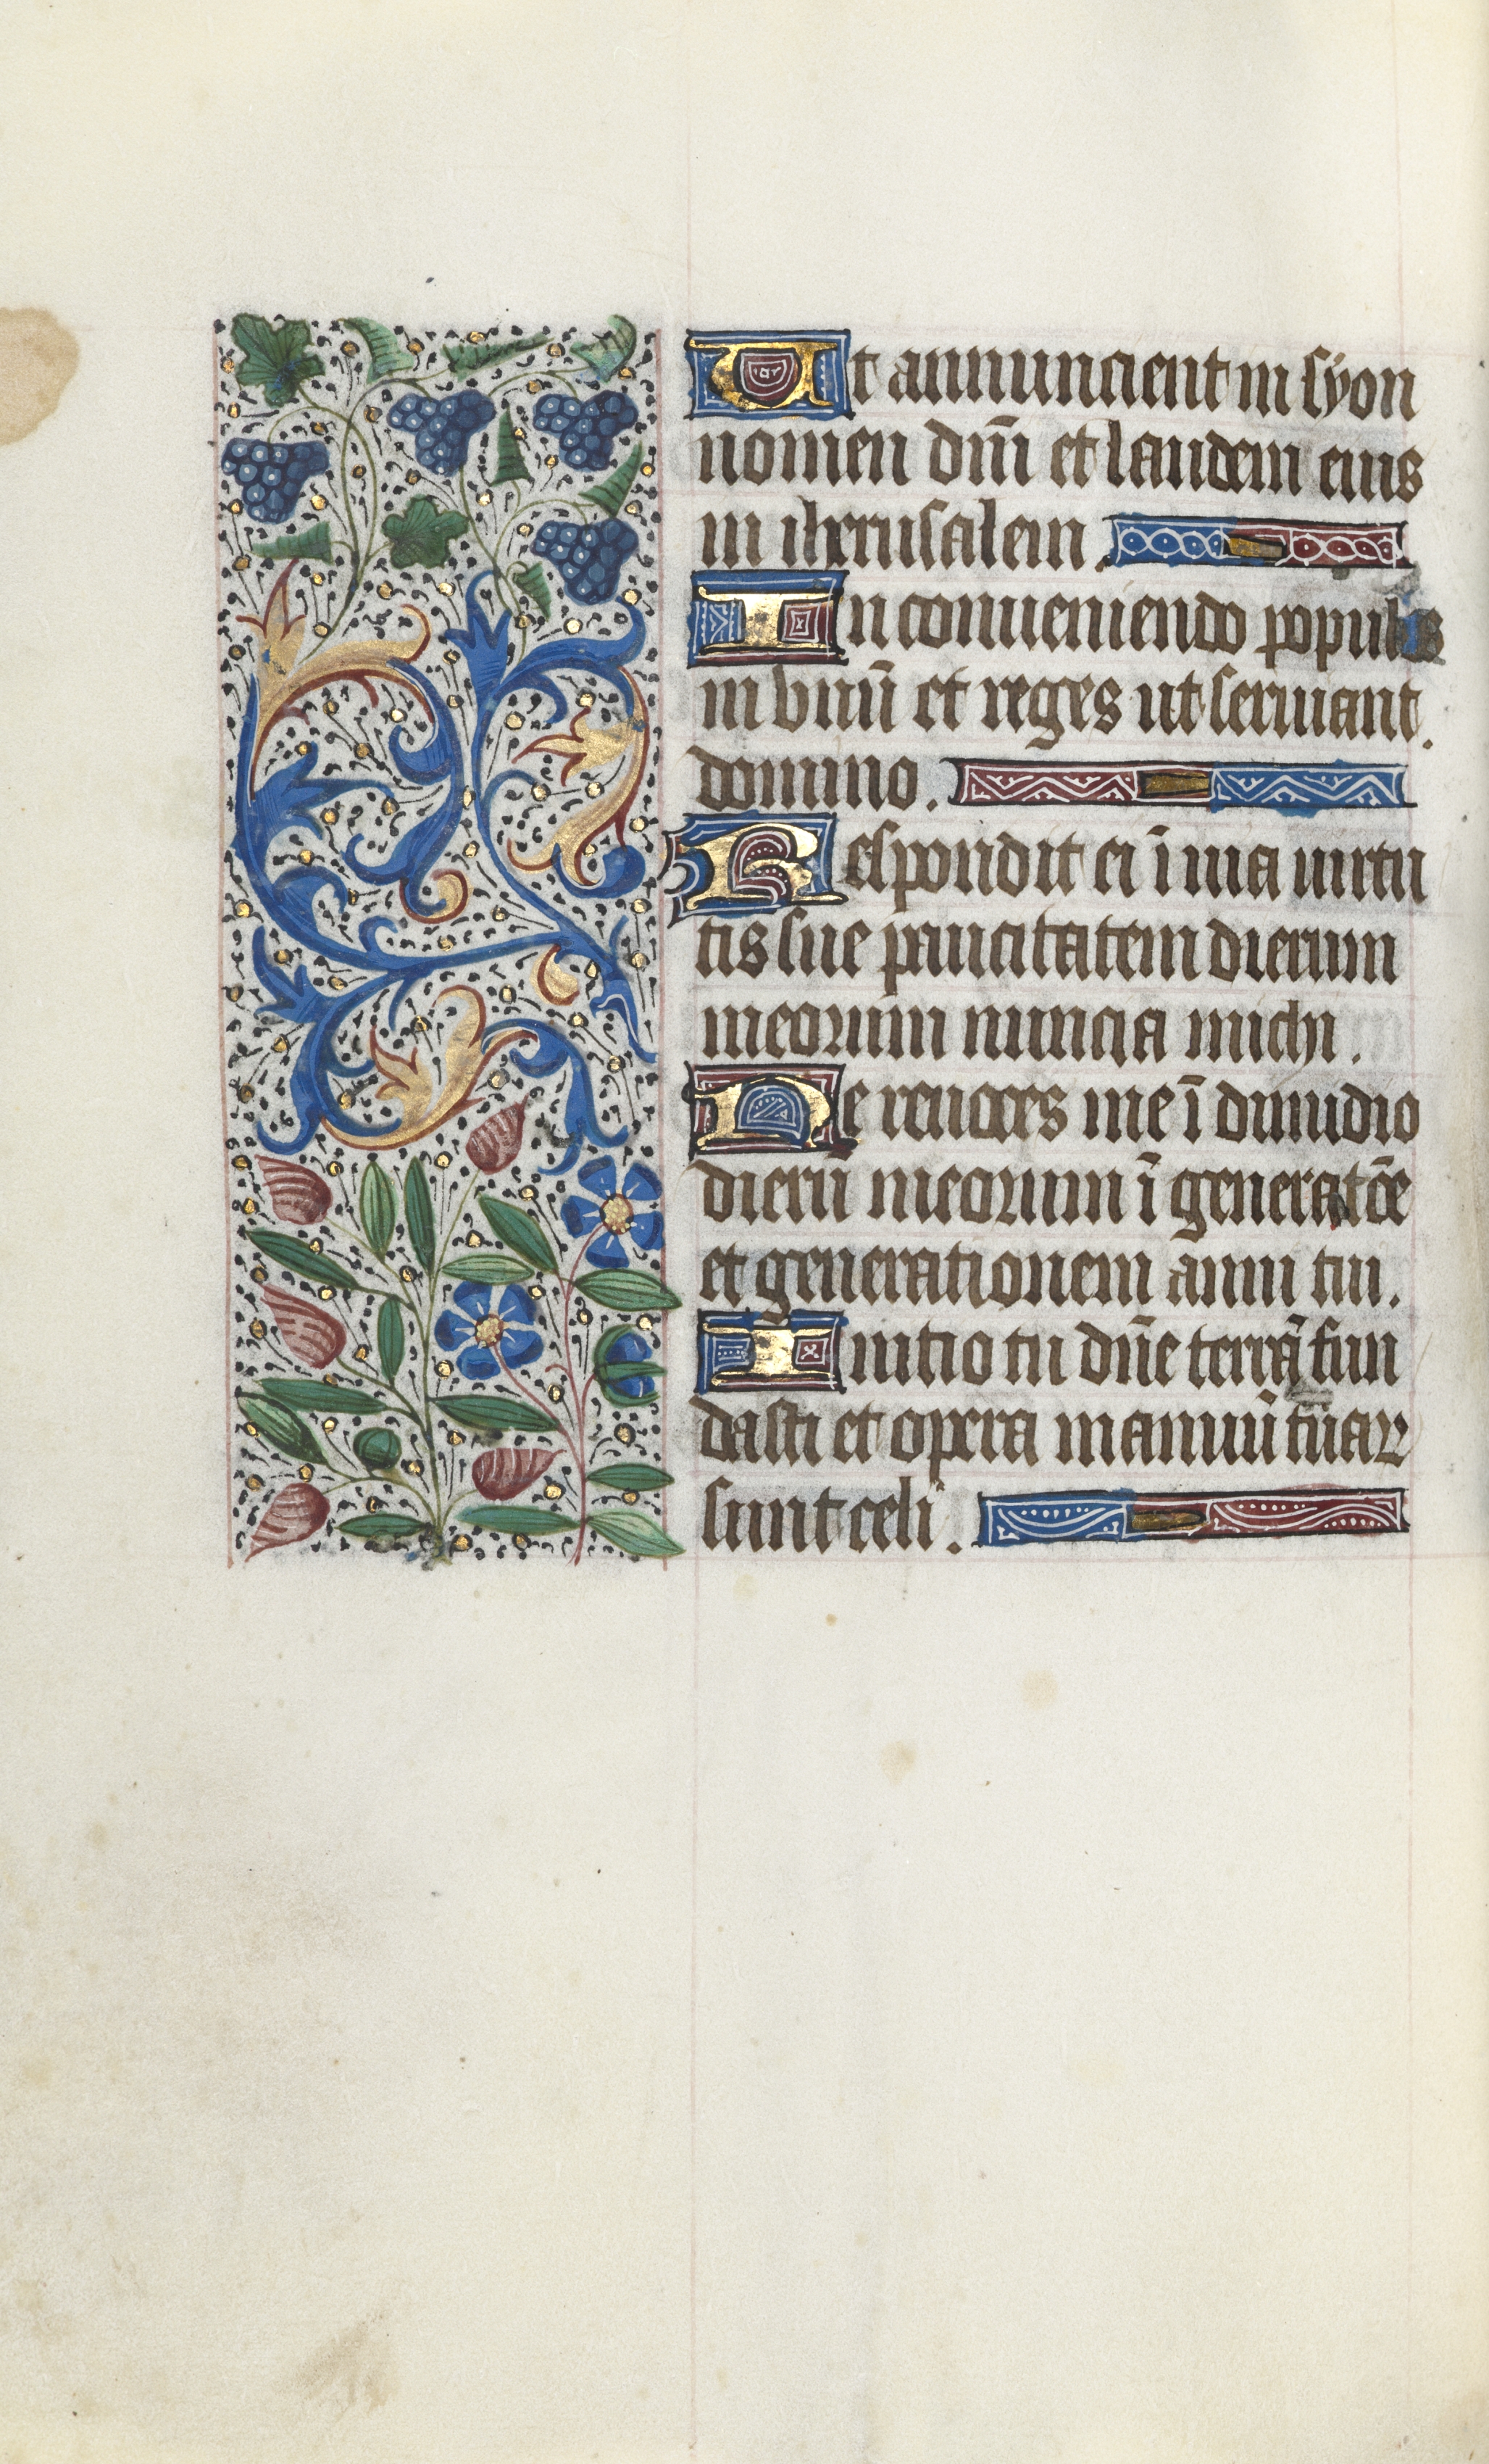 Book of Hours (Use of Rouen): fol. 89v